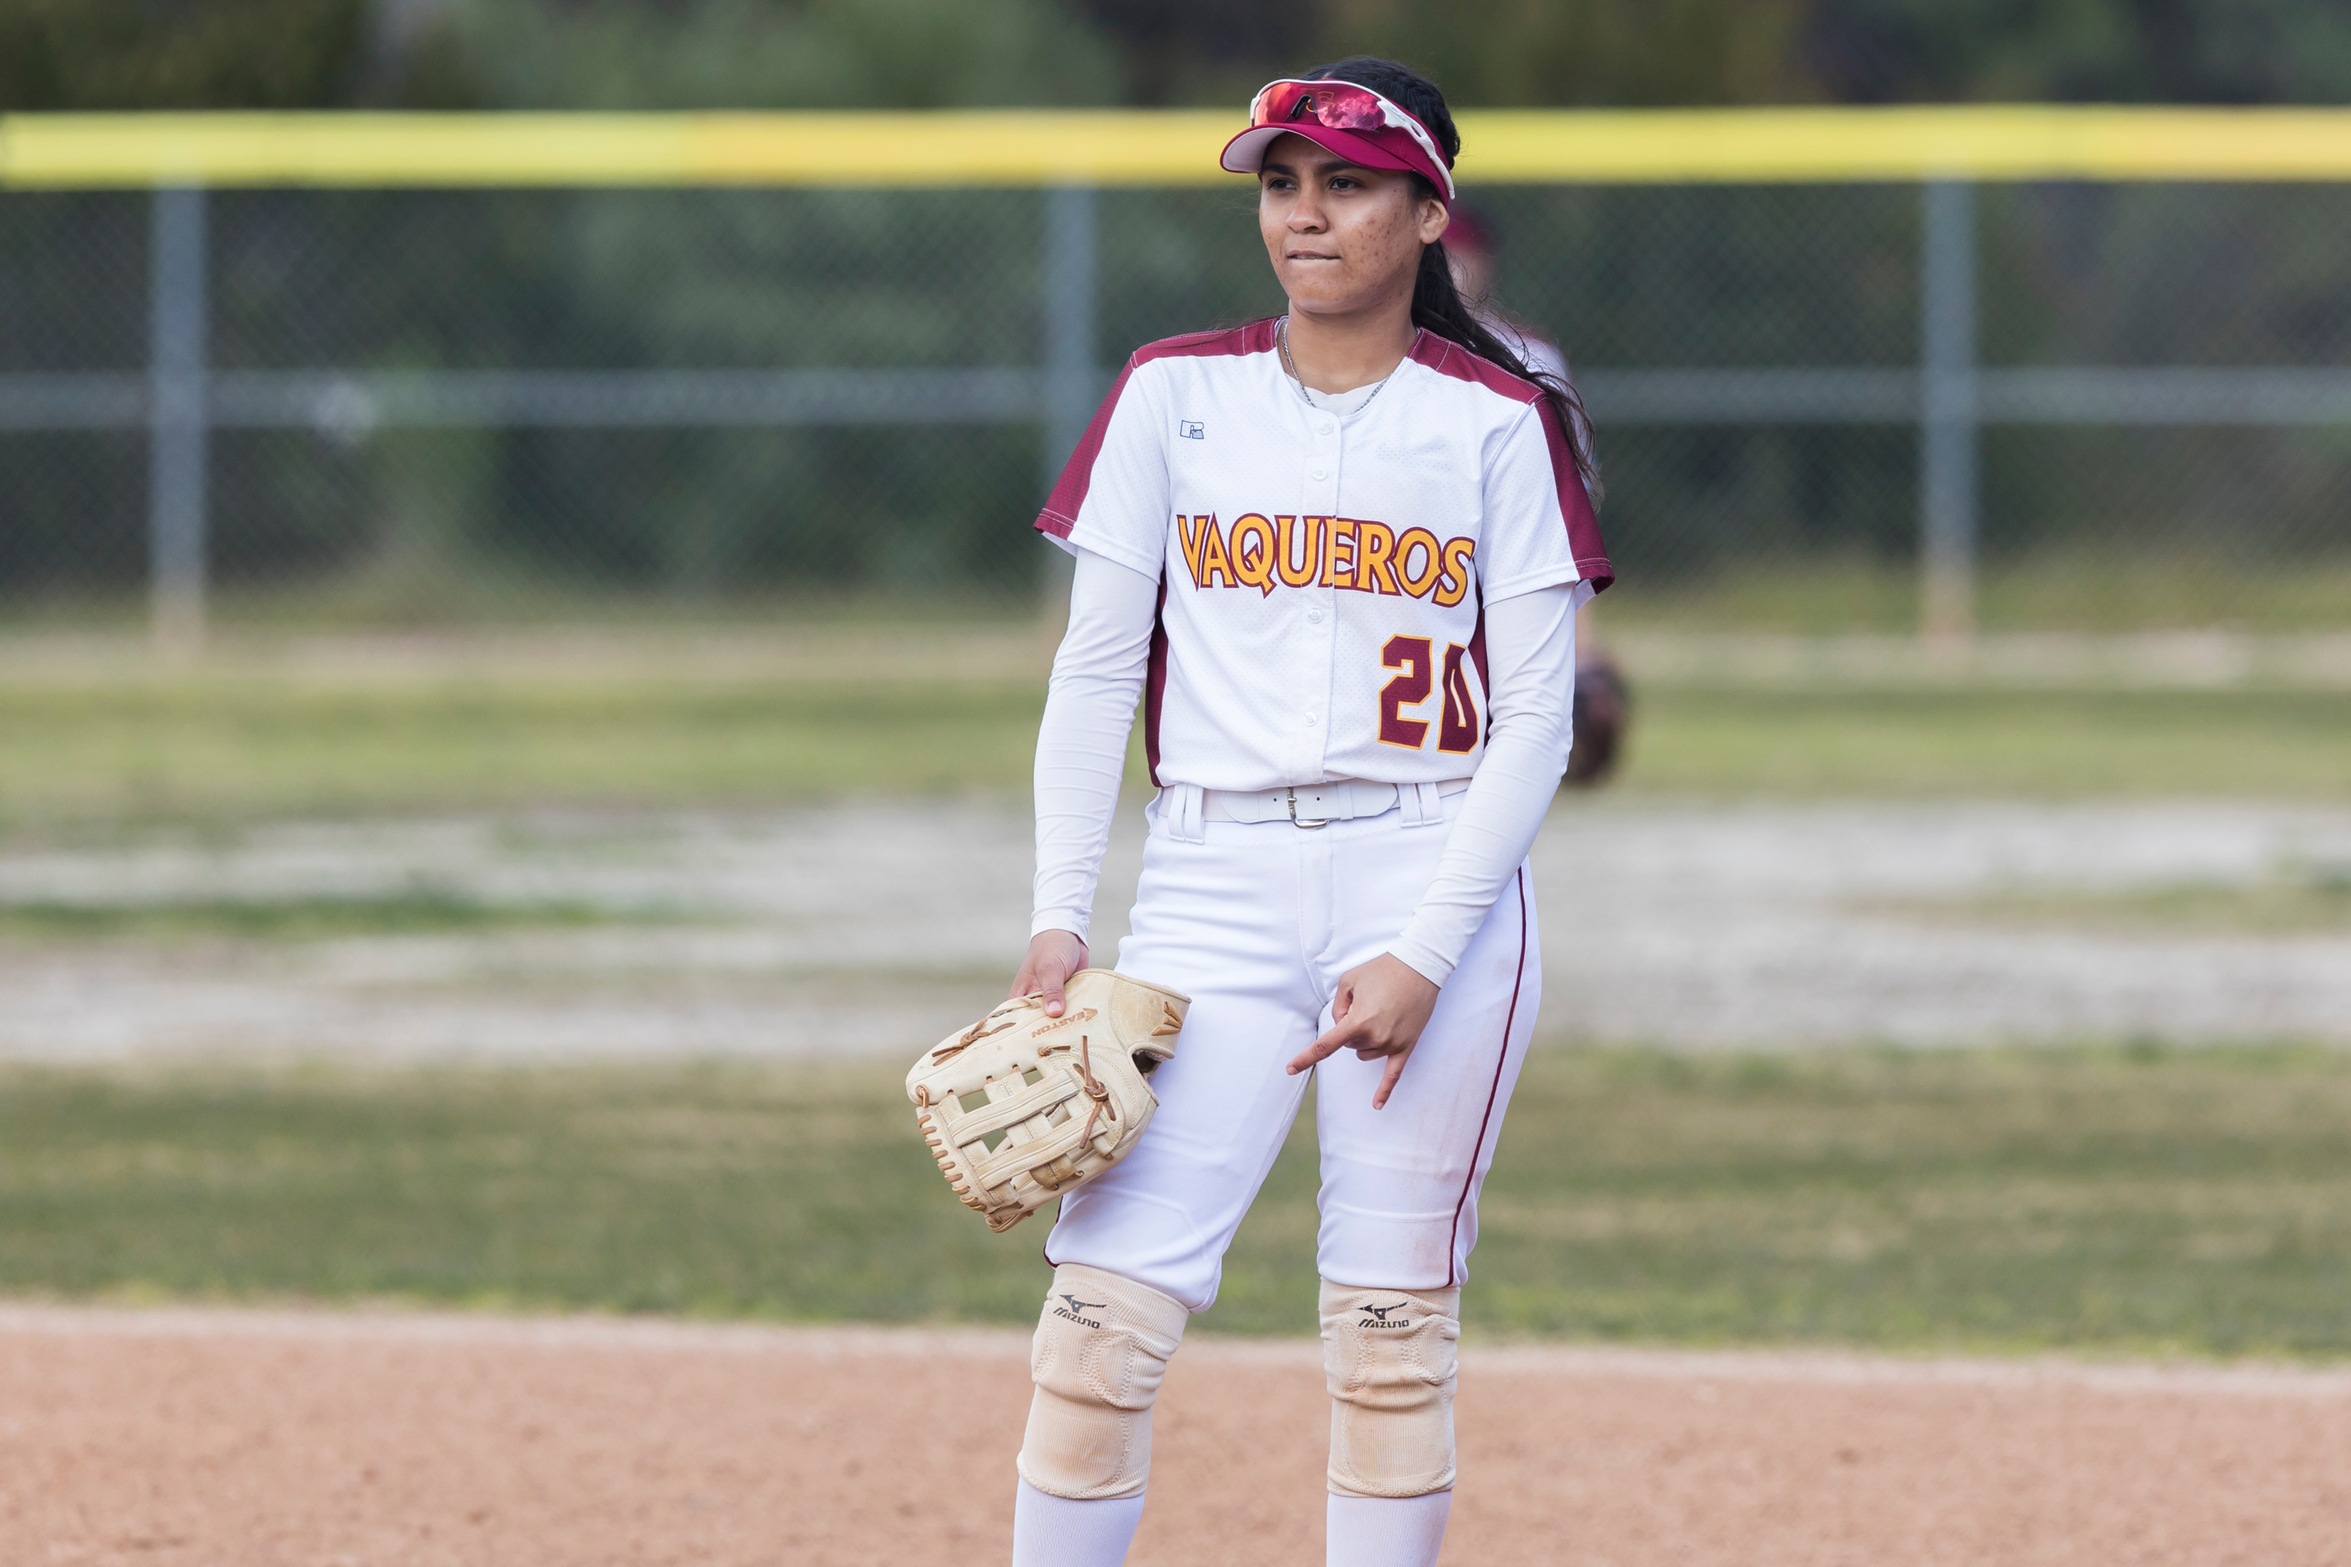 GCC Women's Softball rallies for 4-2 home win over L.A. Valley College April 18; Jimena Ibarra has two hits and a solo homer